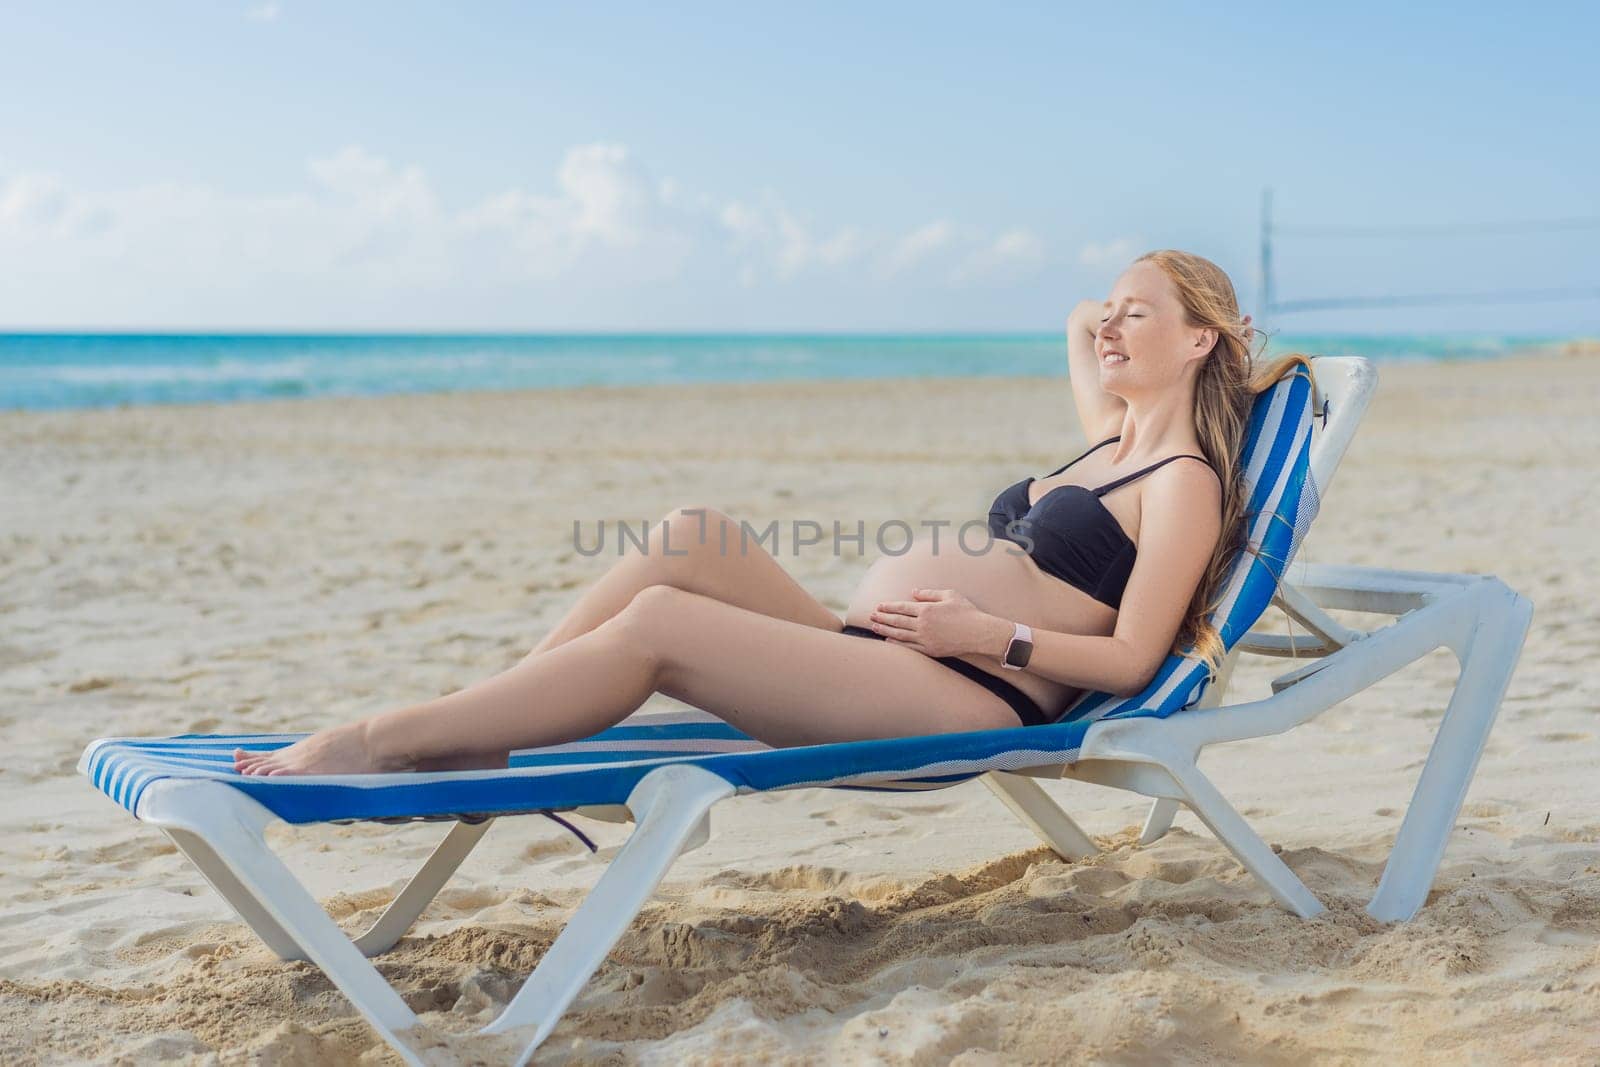 Basking in seaside tranquility, a pregnant woman lounges on a sun lounger, embracing the soothing ambiance of the beach for a moment of serene relaxation by galitskaya